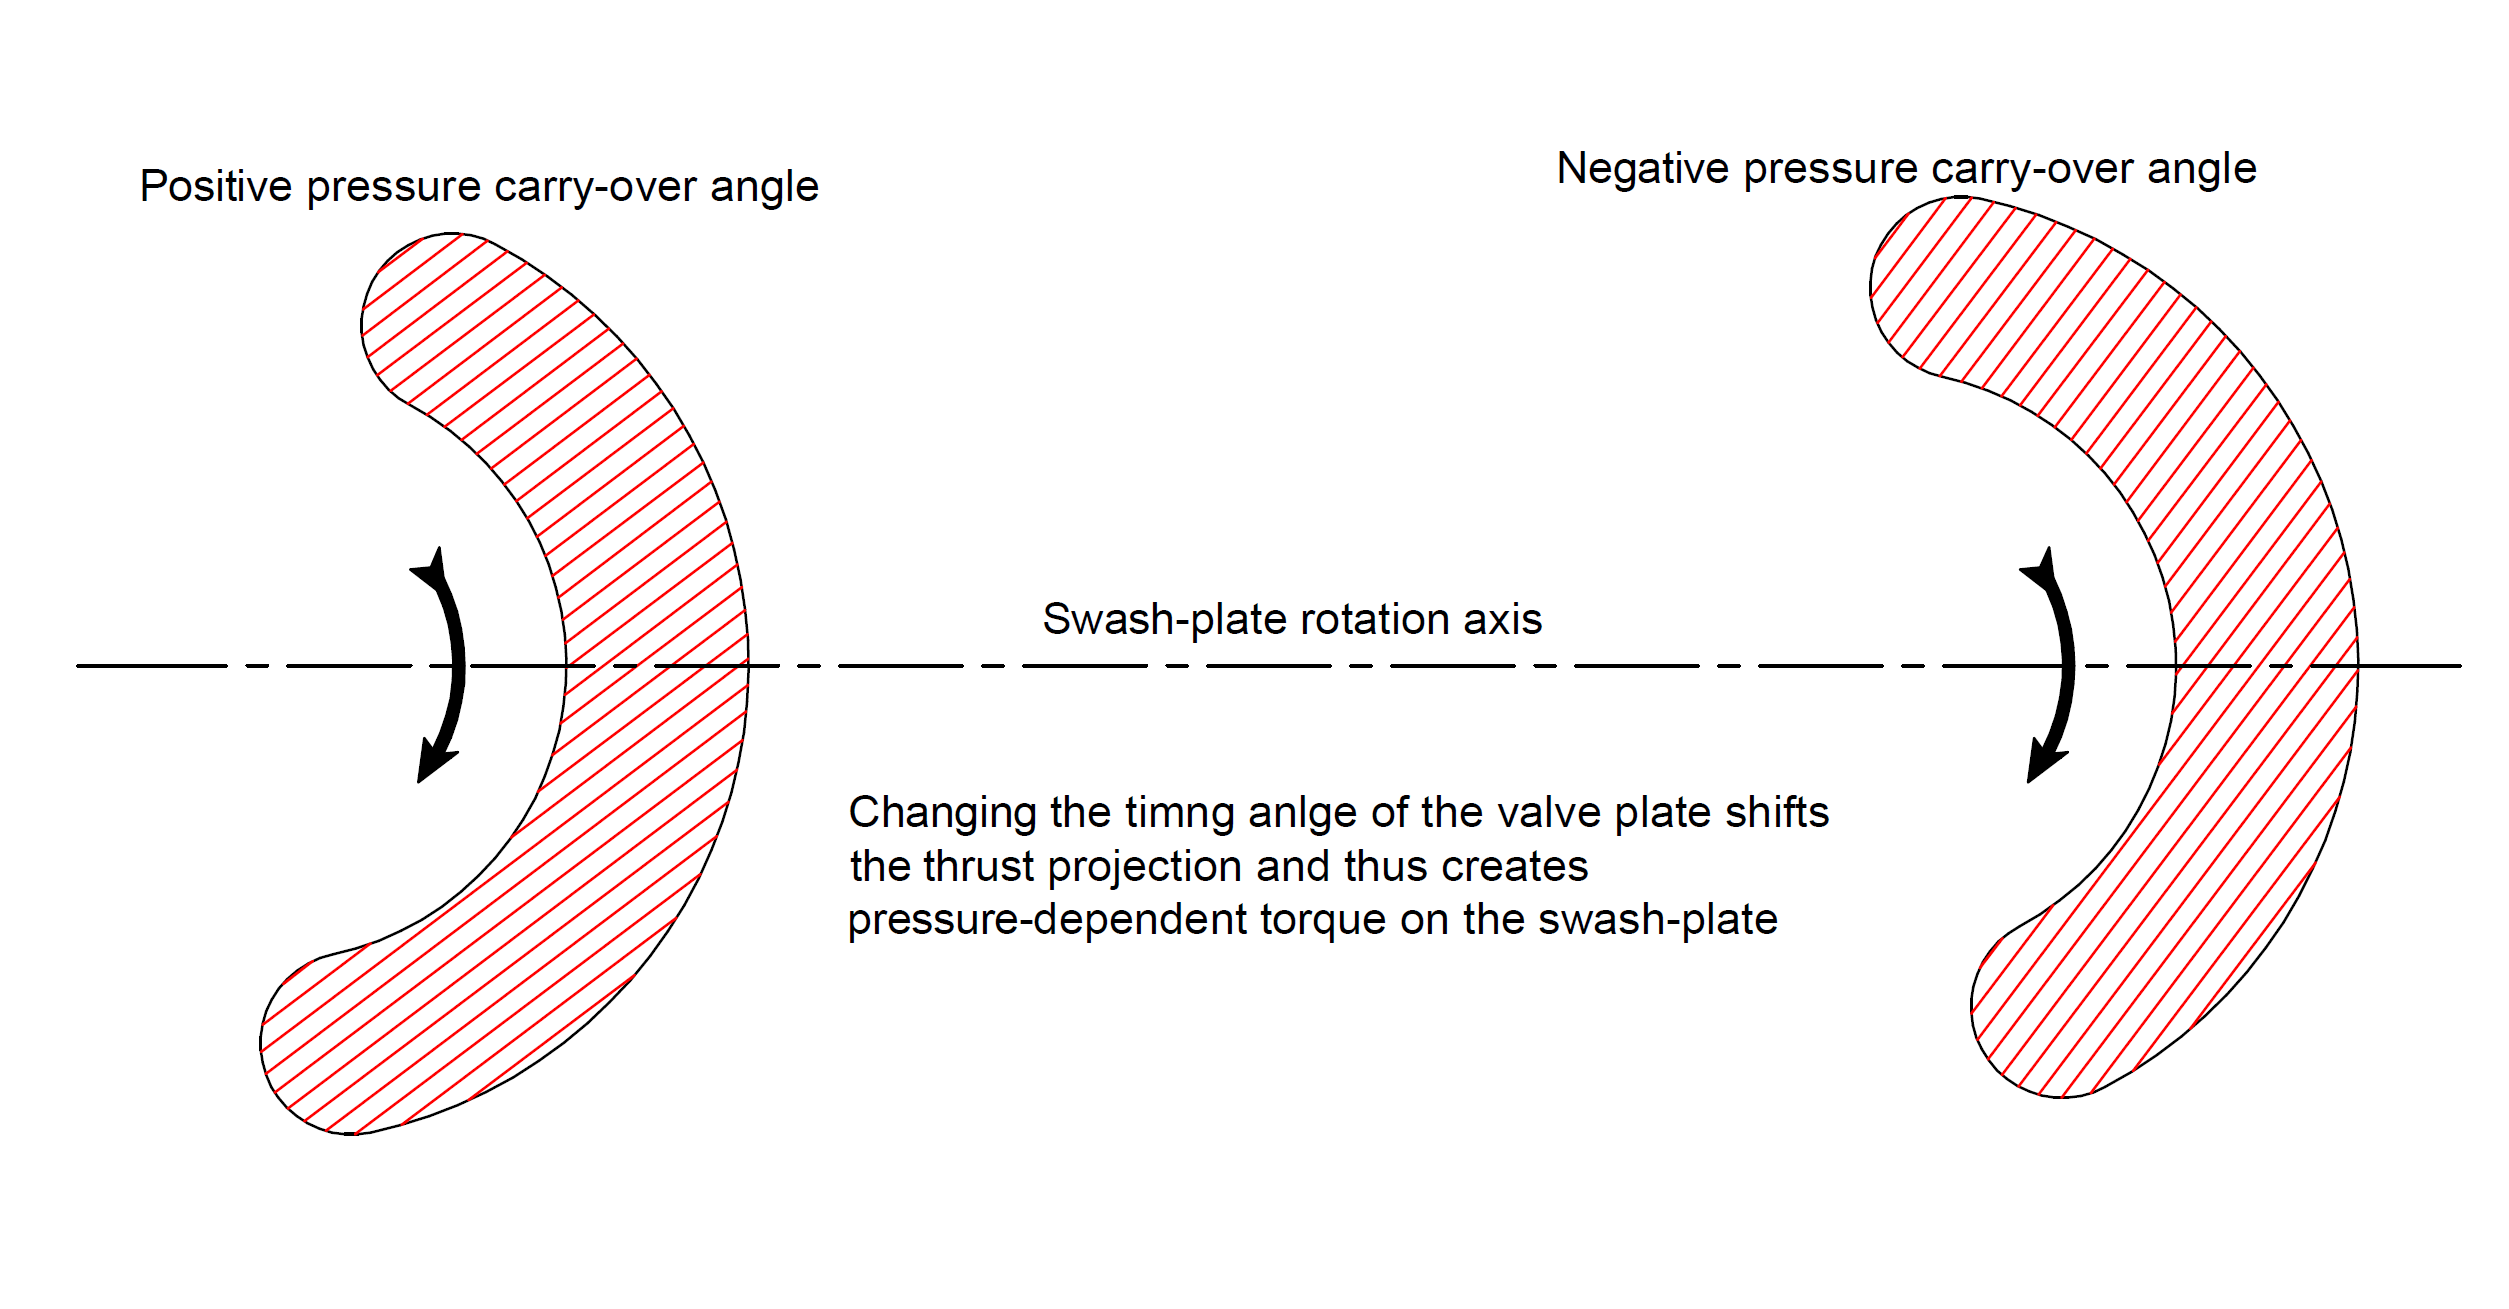 Valve plate timing angle affects the pressure-dependent torque of the swashplate